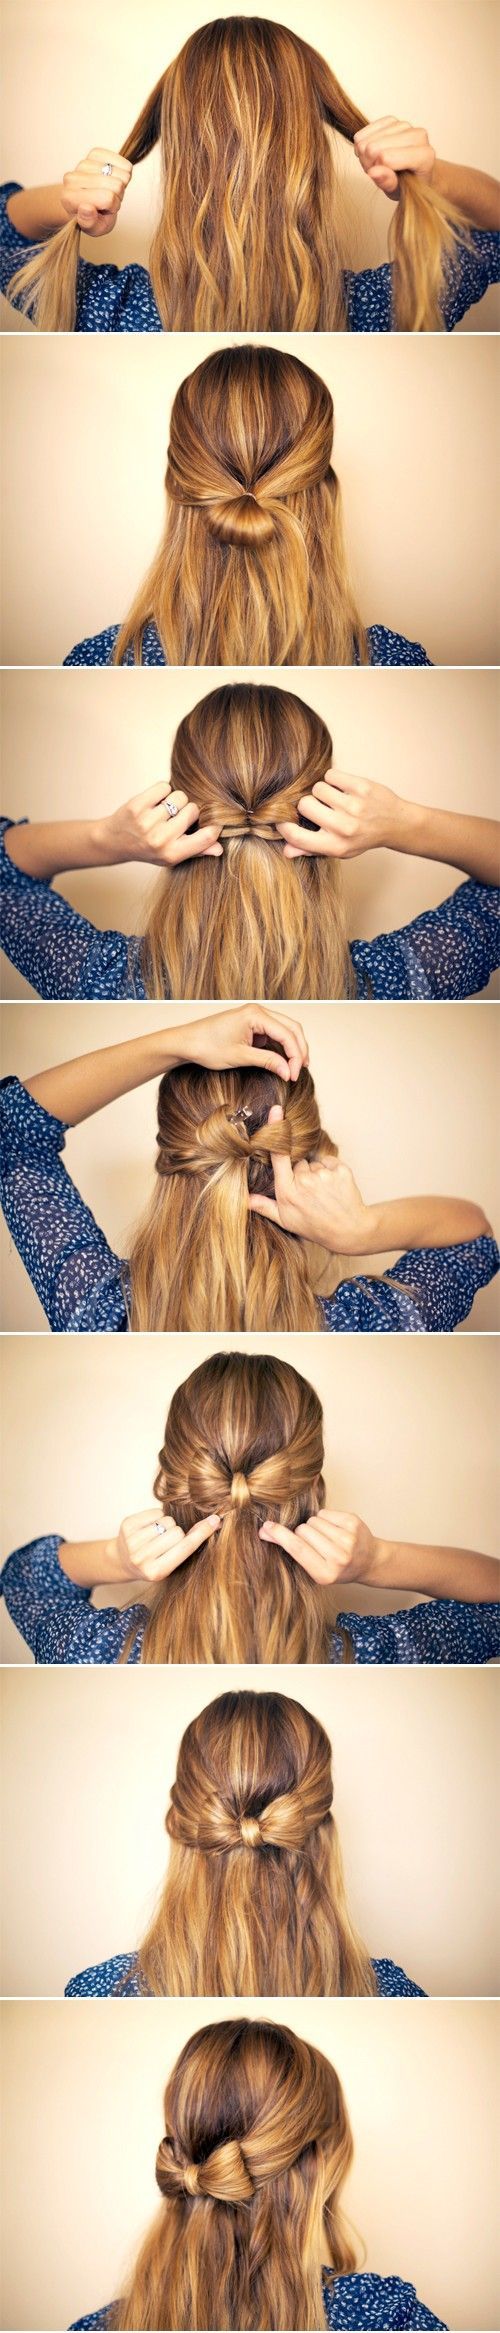 17 Quick And Easy #DIY #Hairstyle #Tutorials...